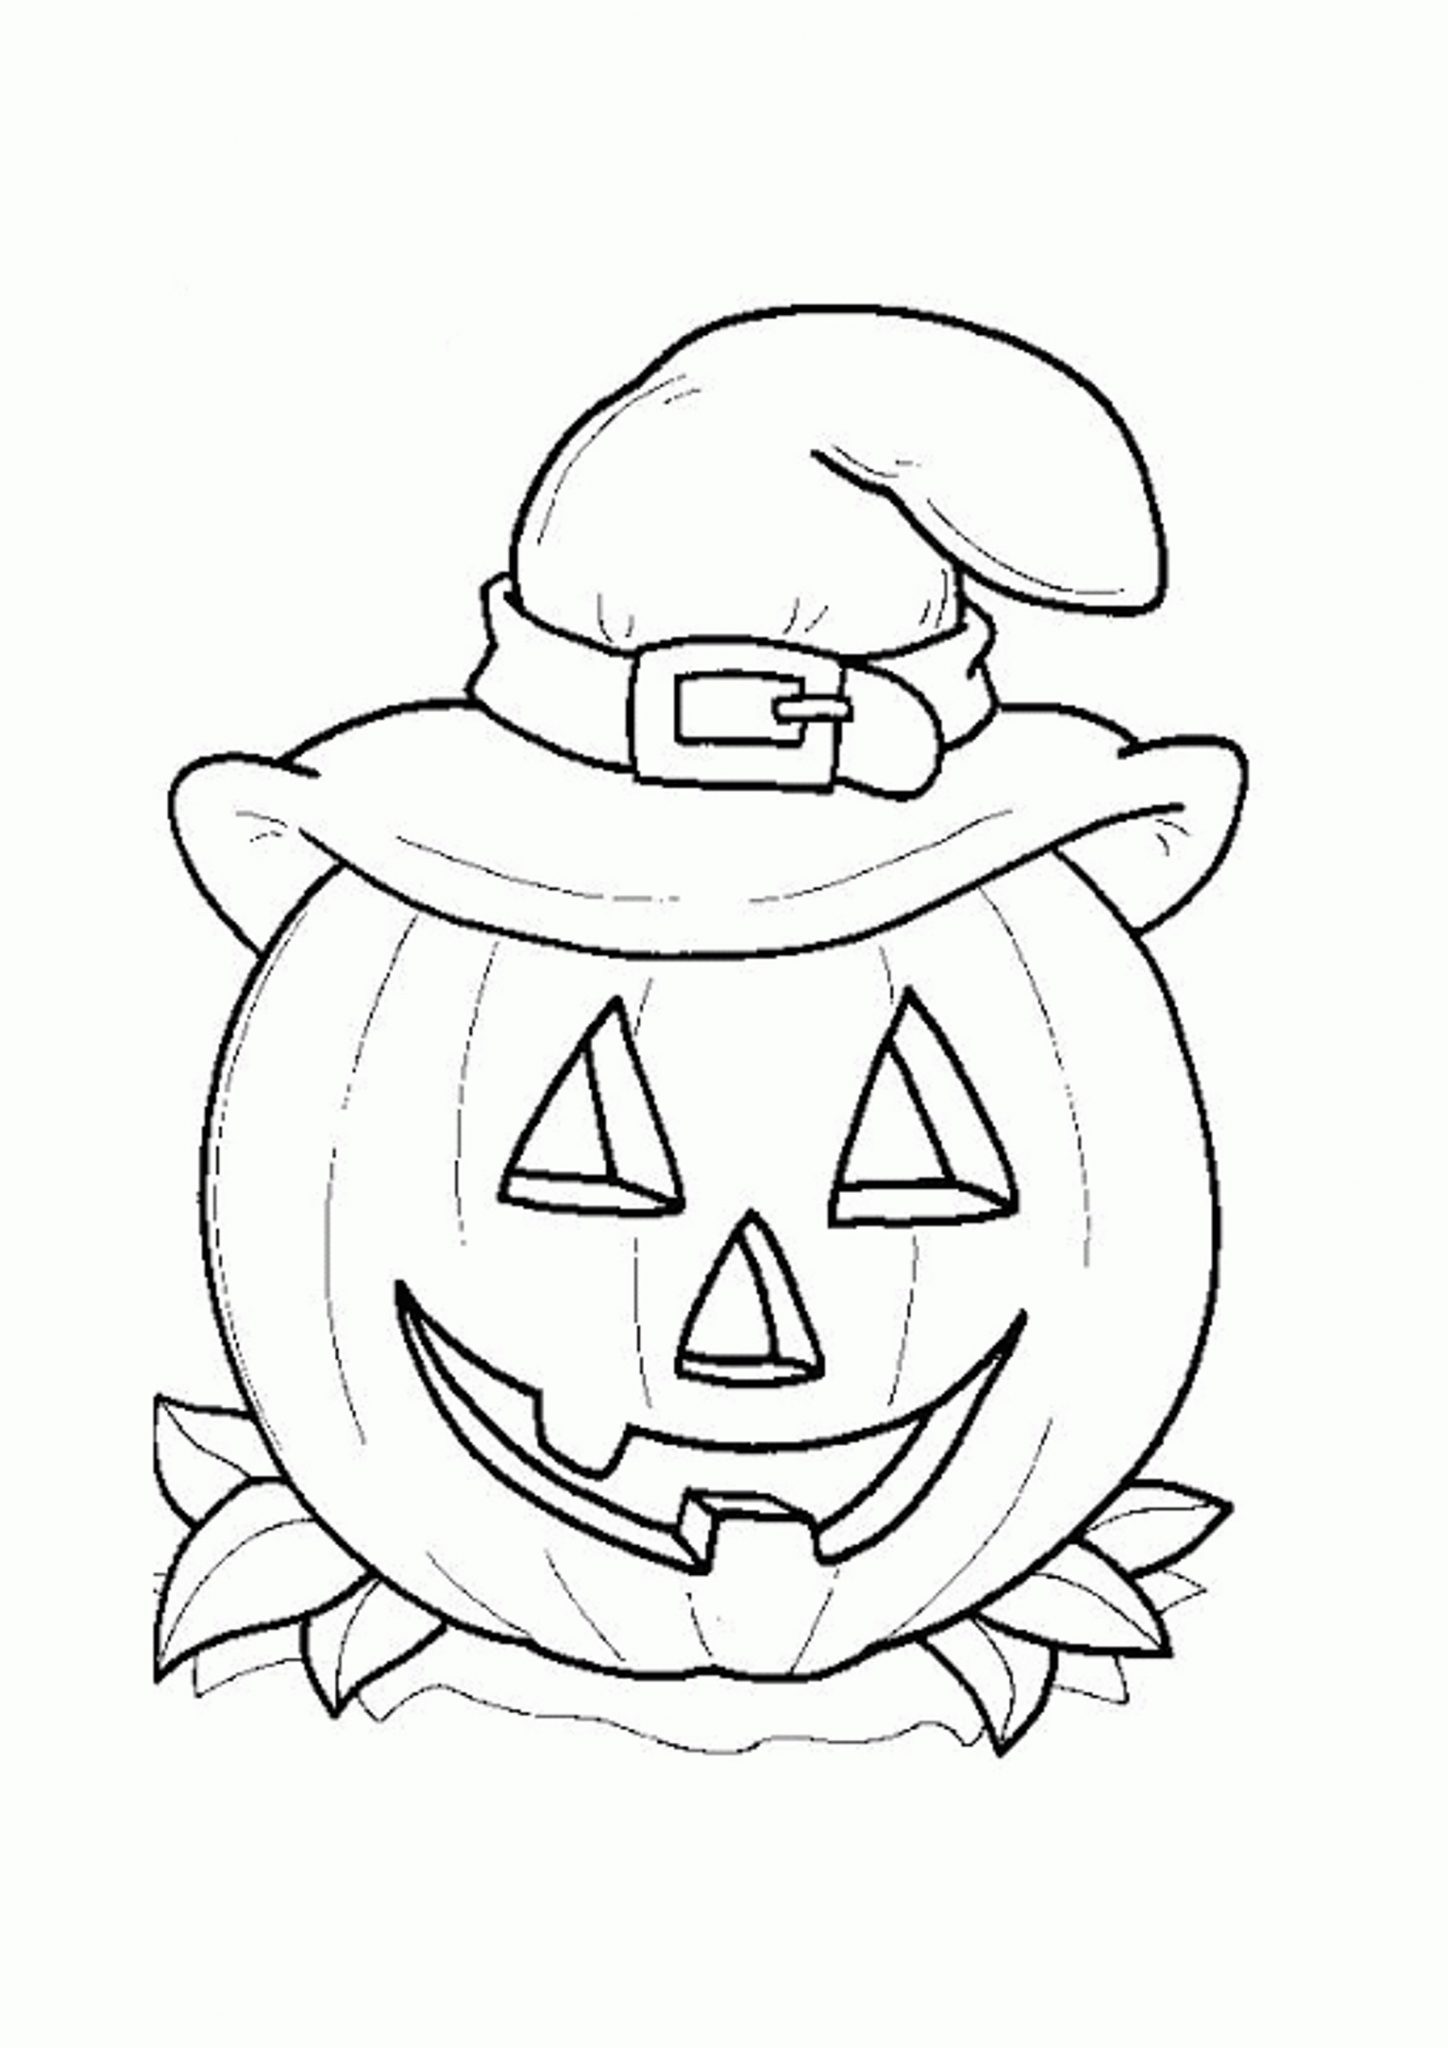 pumpkin-coloring-pages-for-kids-coloring